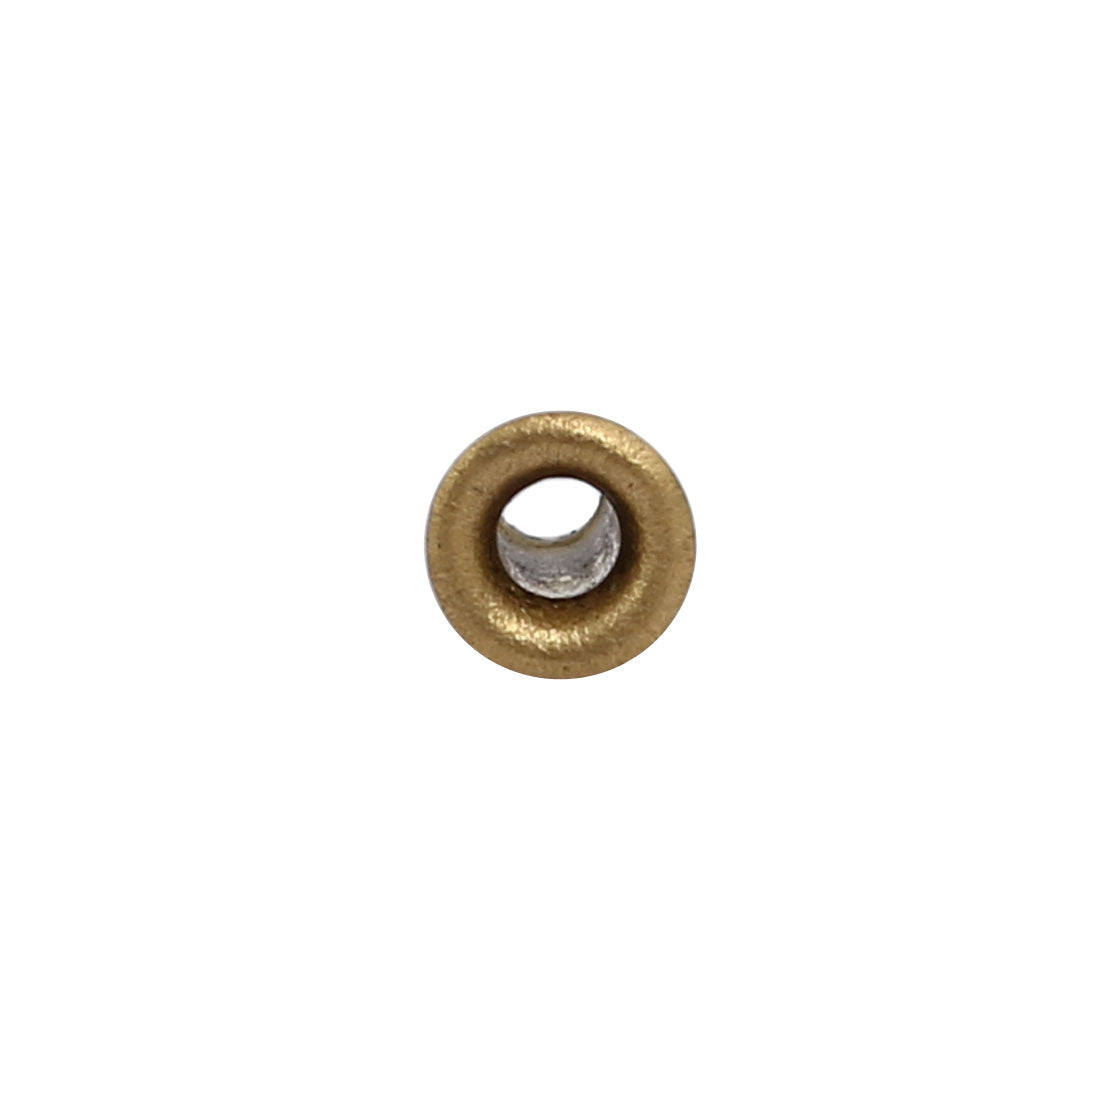 uxcell Uxcell 100pcs M2.5 x 7mm Brass Plated Metal Hollow Eyelets Rivets Gold Tone